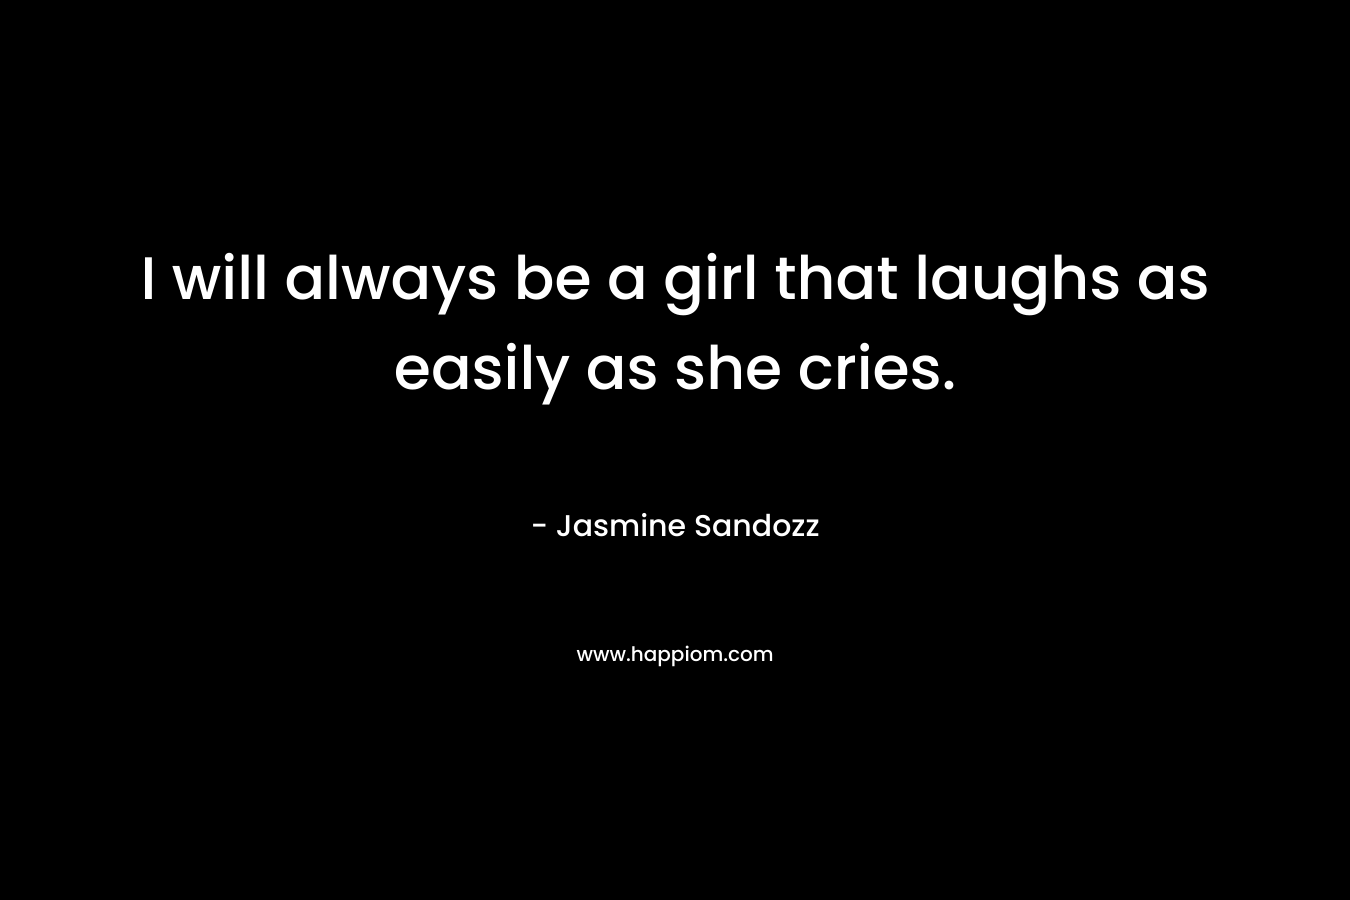 I will always be a girl that laughs as easily as she cries. – Jasmine Sandozz